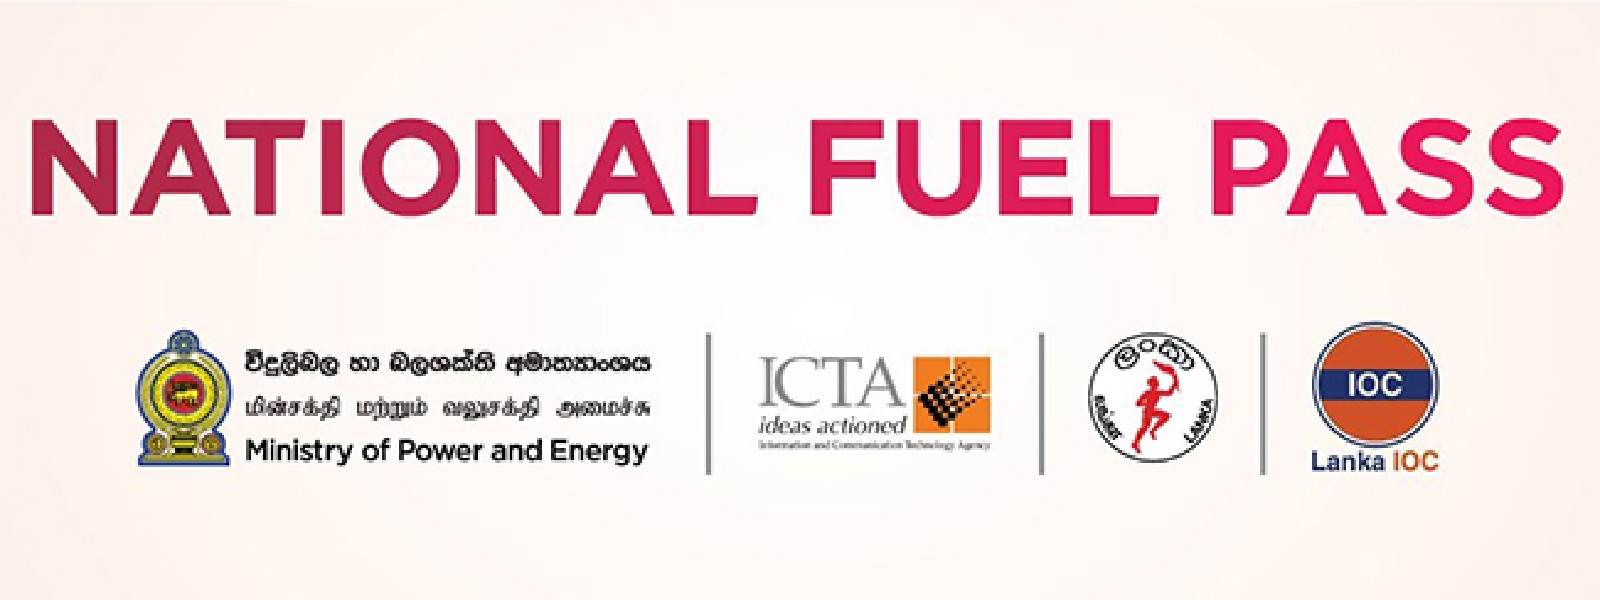 National Fuel Pass Update from Minister